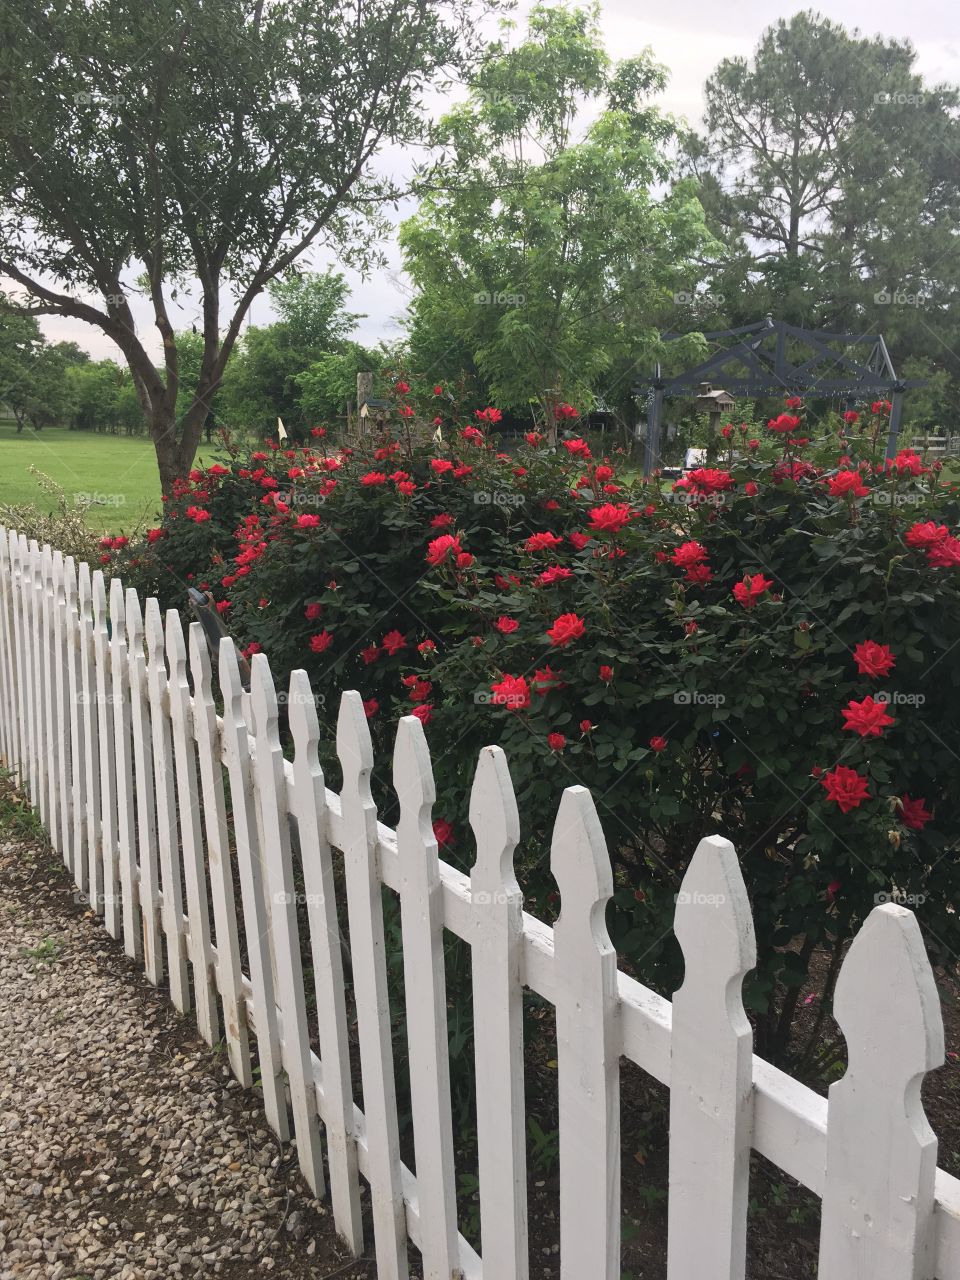 Roses and Picket Fence